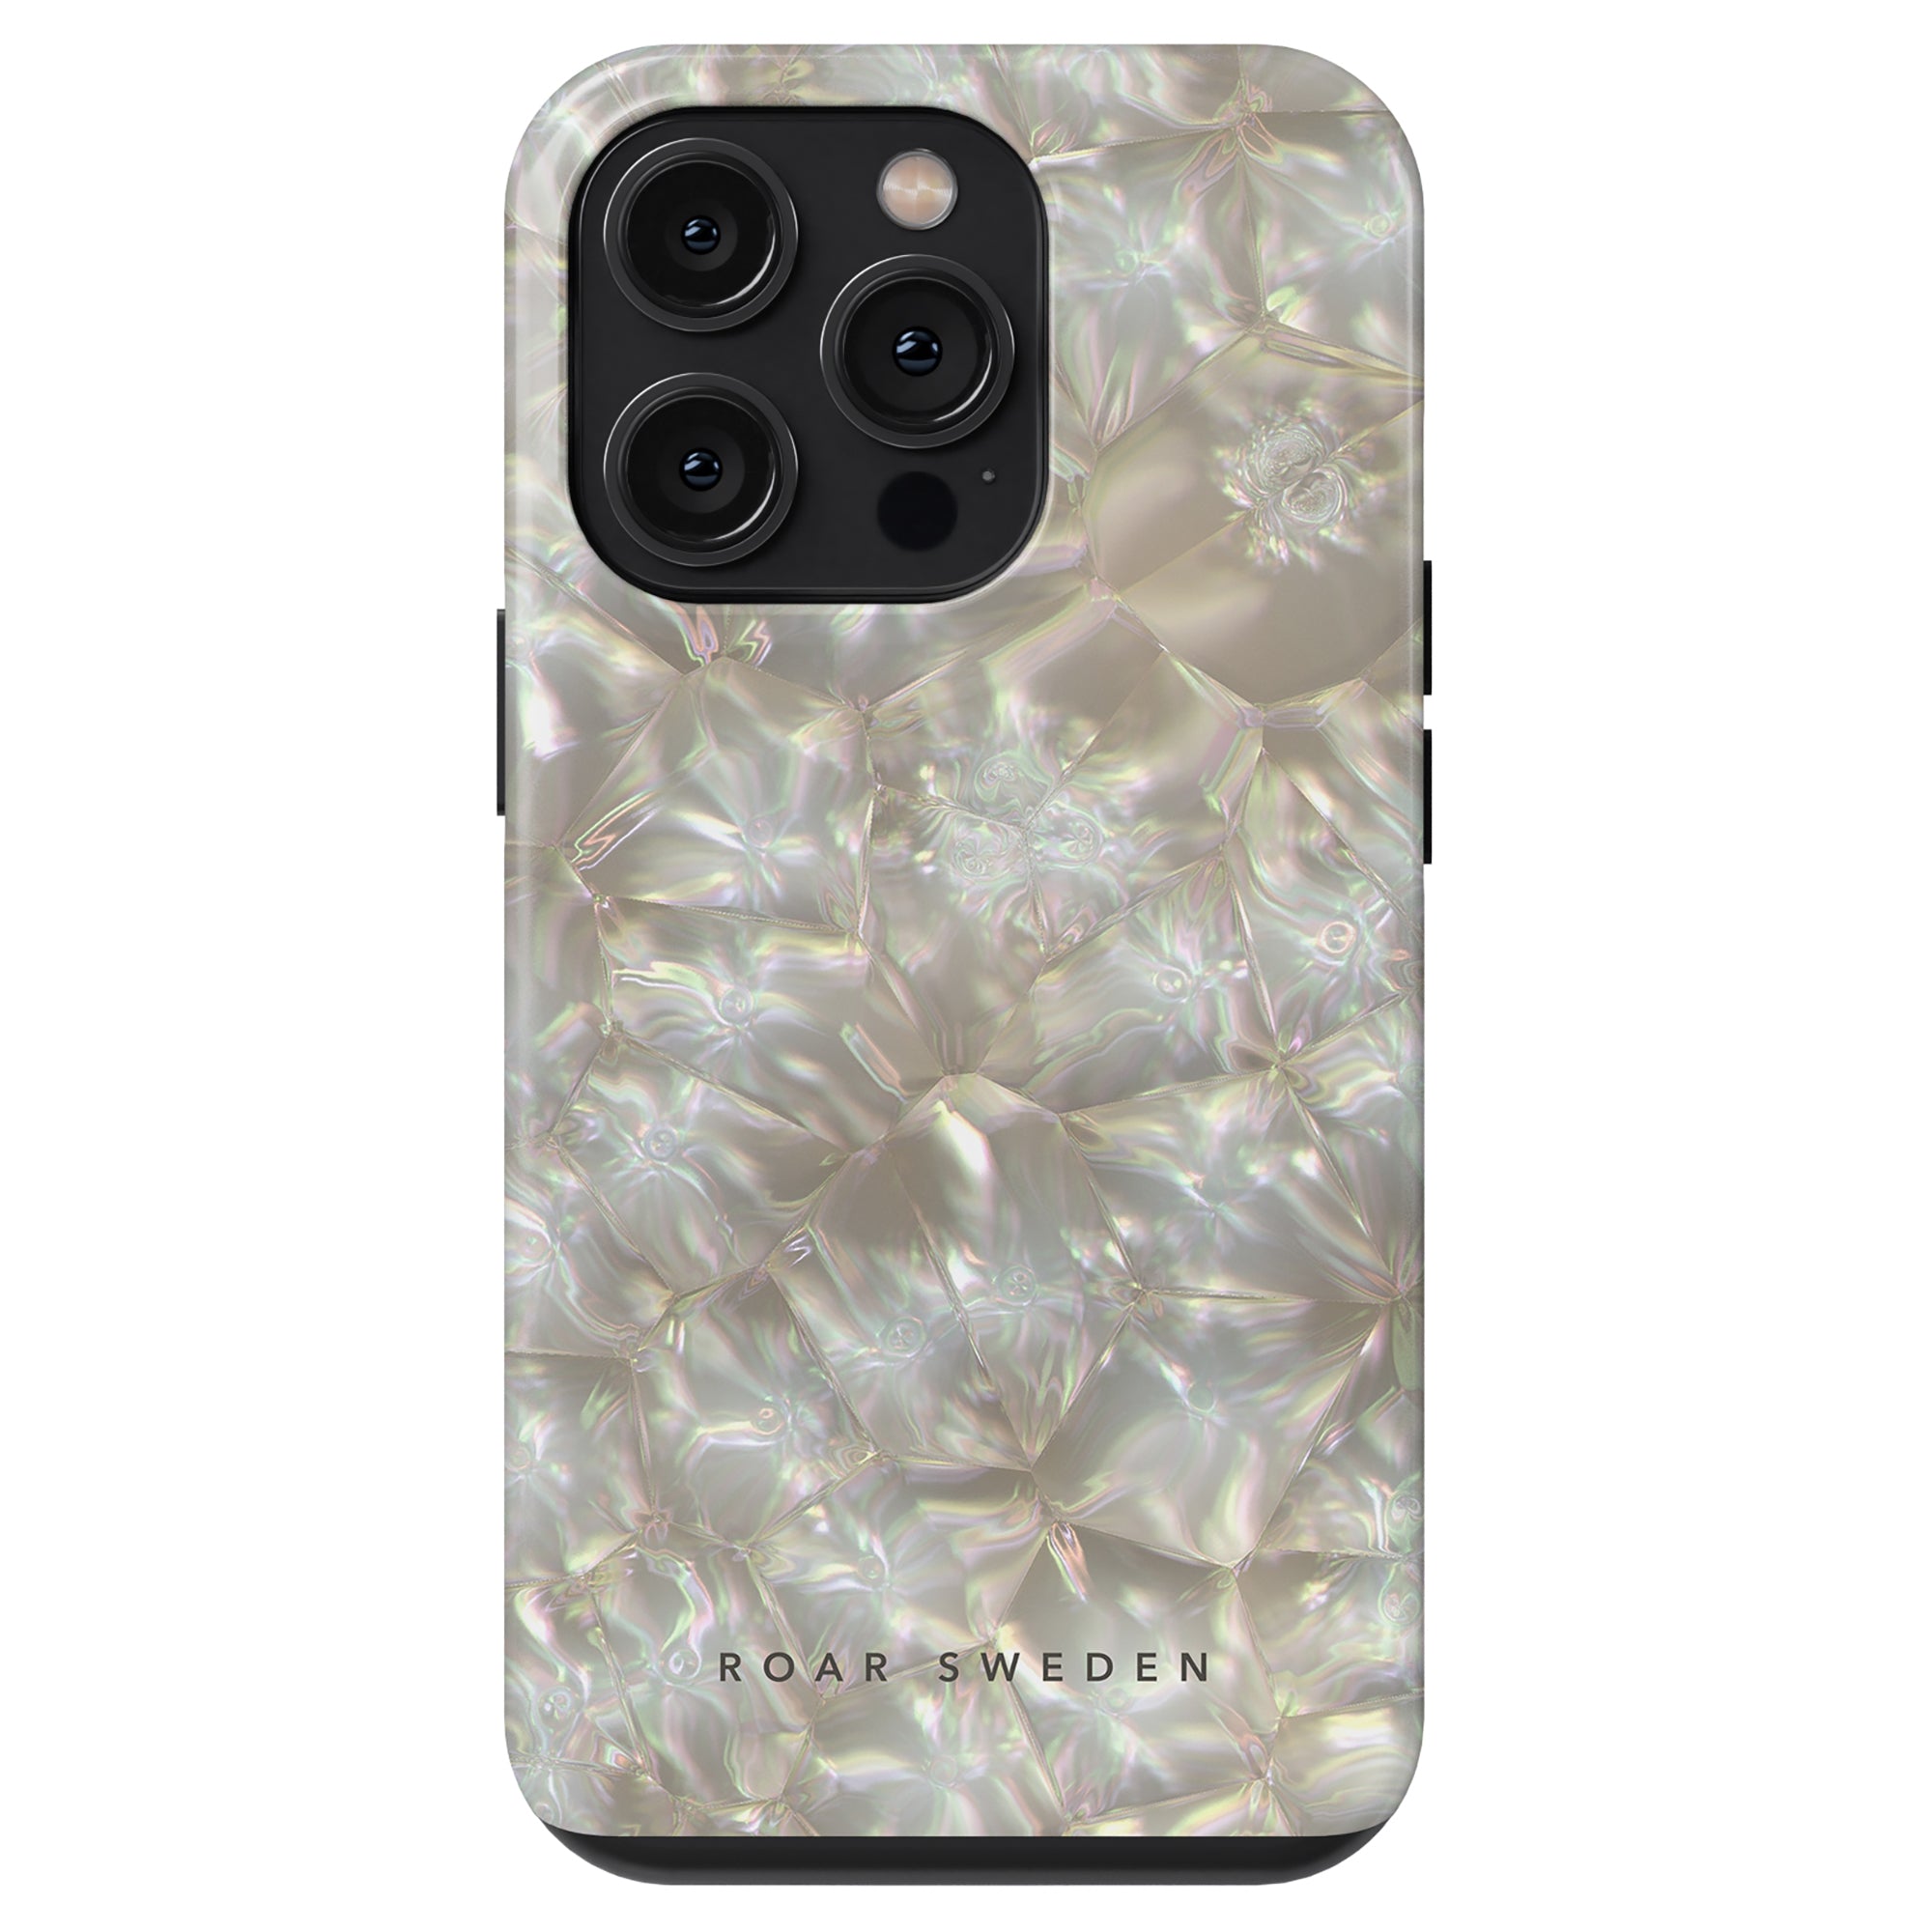 Smartphone cover from the Pearls - Tough Case Collection featuring a reflective, iridescent pattern with 'ideal of sweden' branding, designed for a model with three cameras.